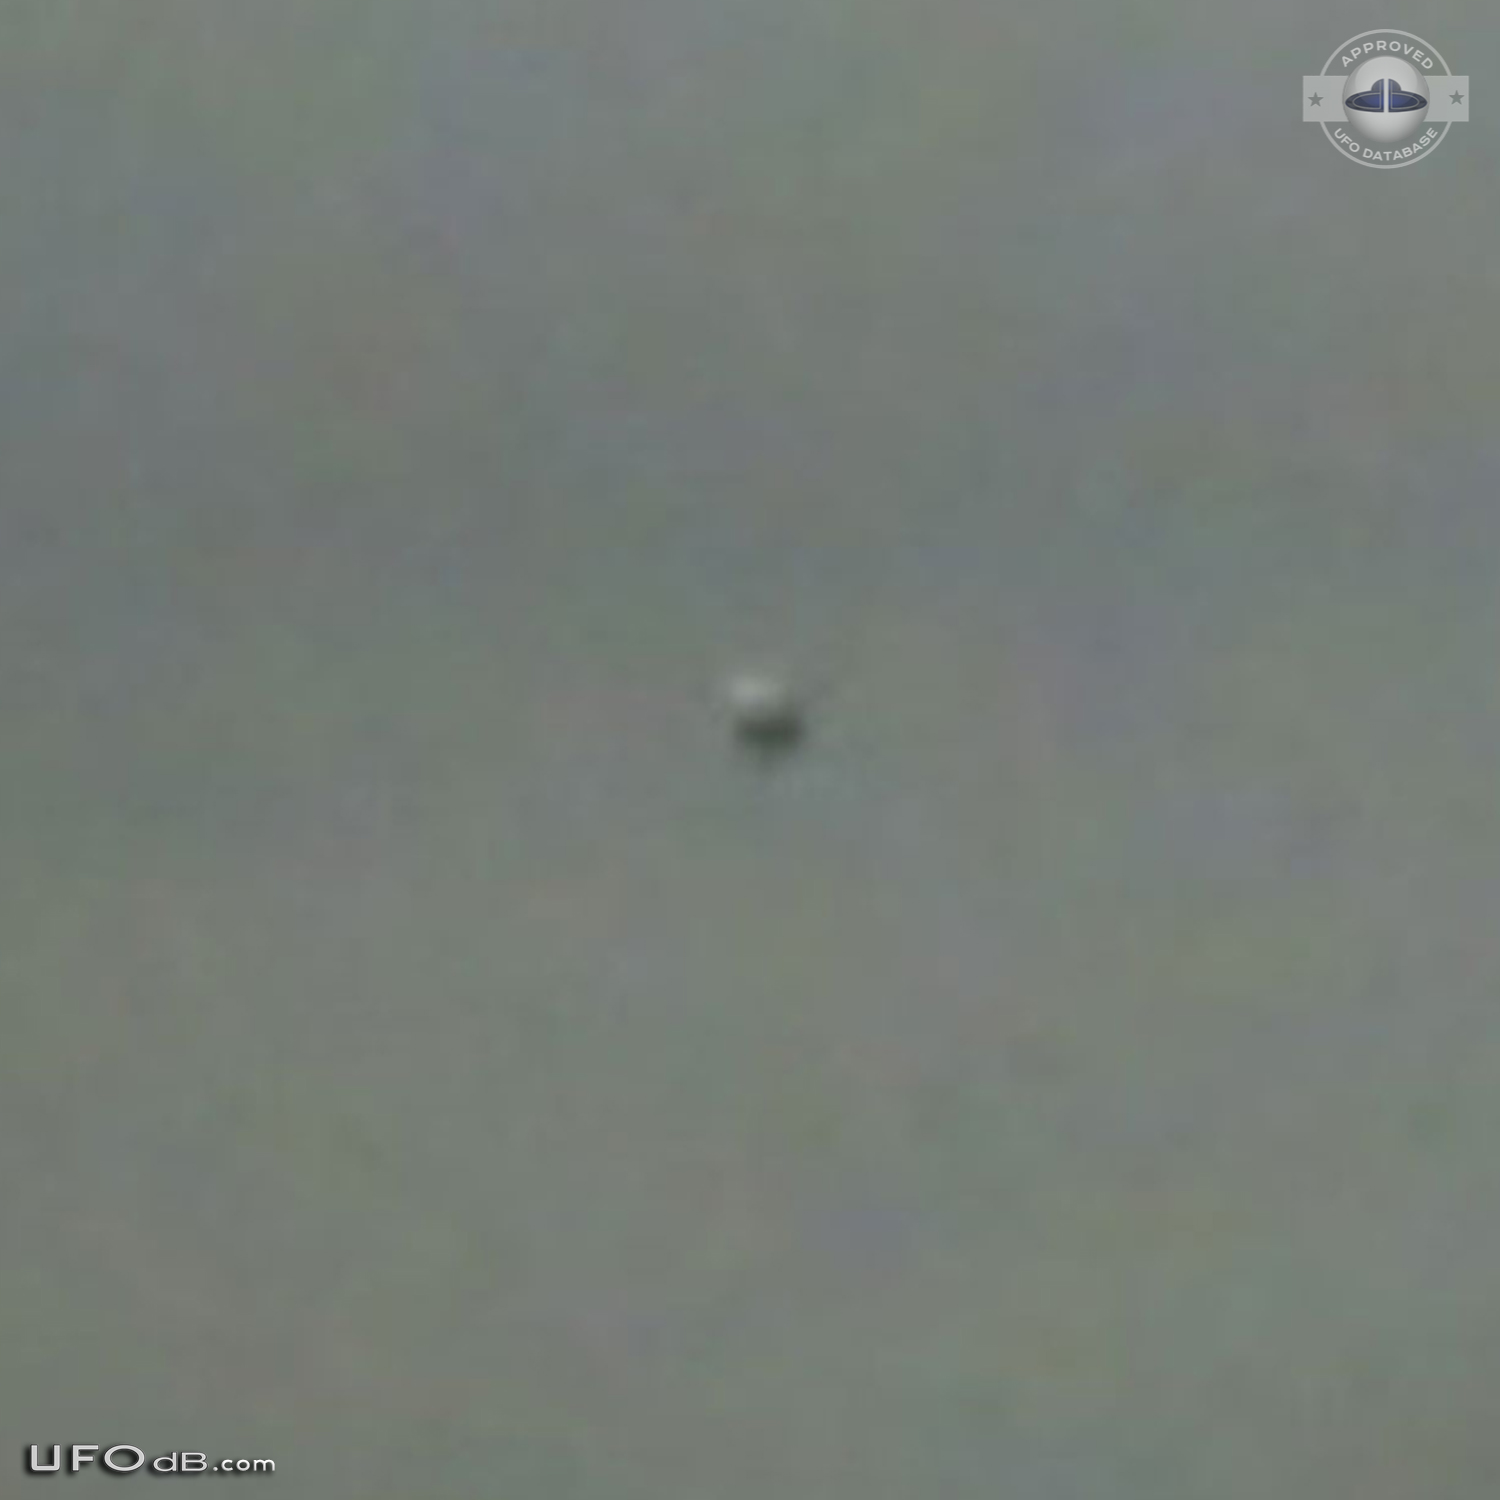 Dark UFO sphere caught on picture during storm in Los Angeles in 2009 UFO Picture #420-3